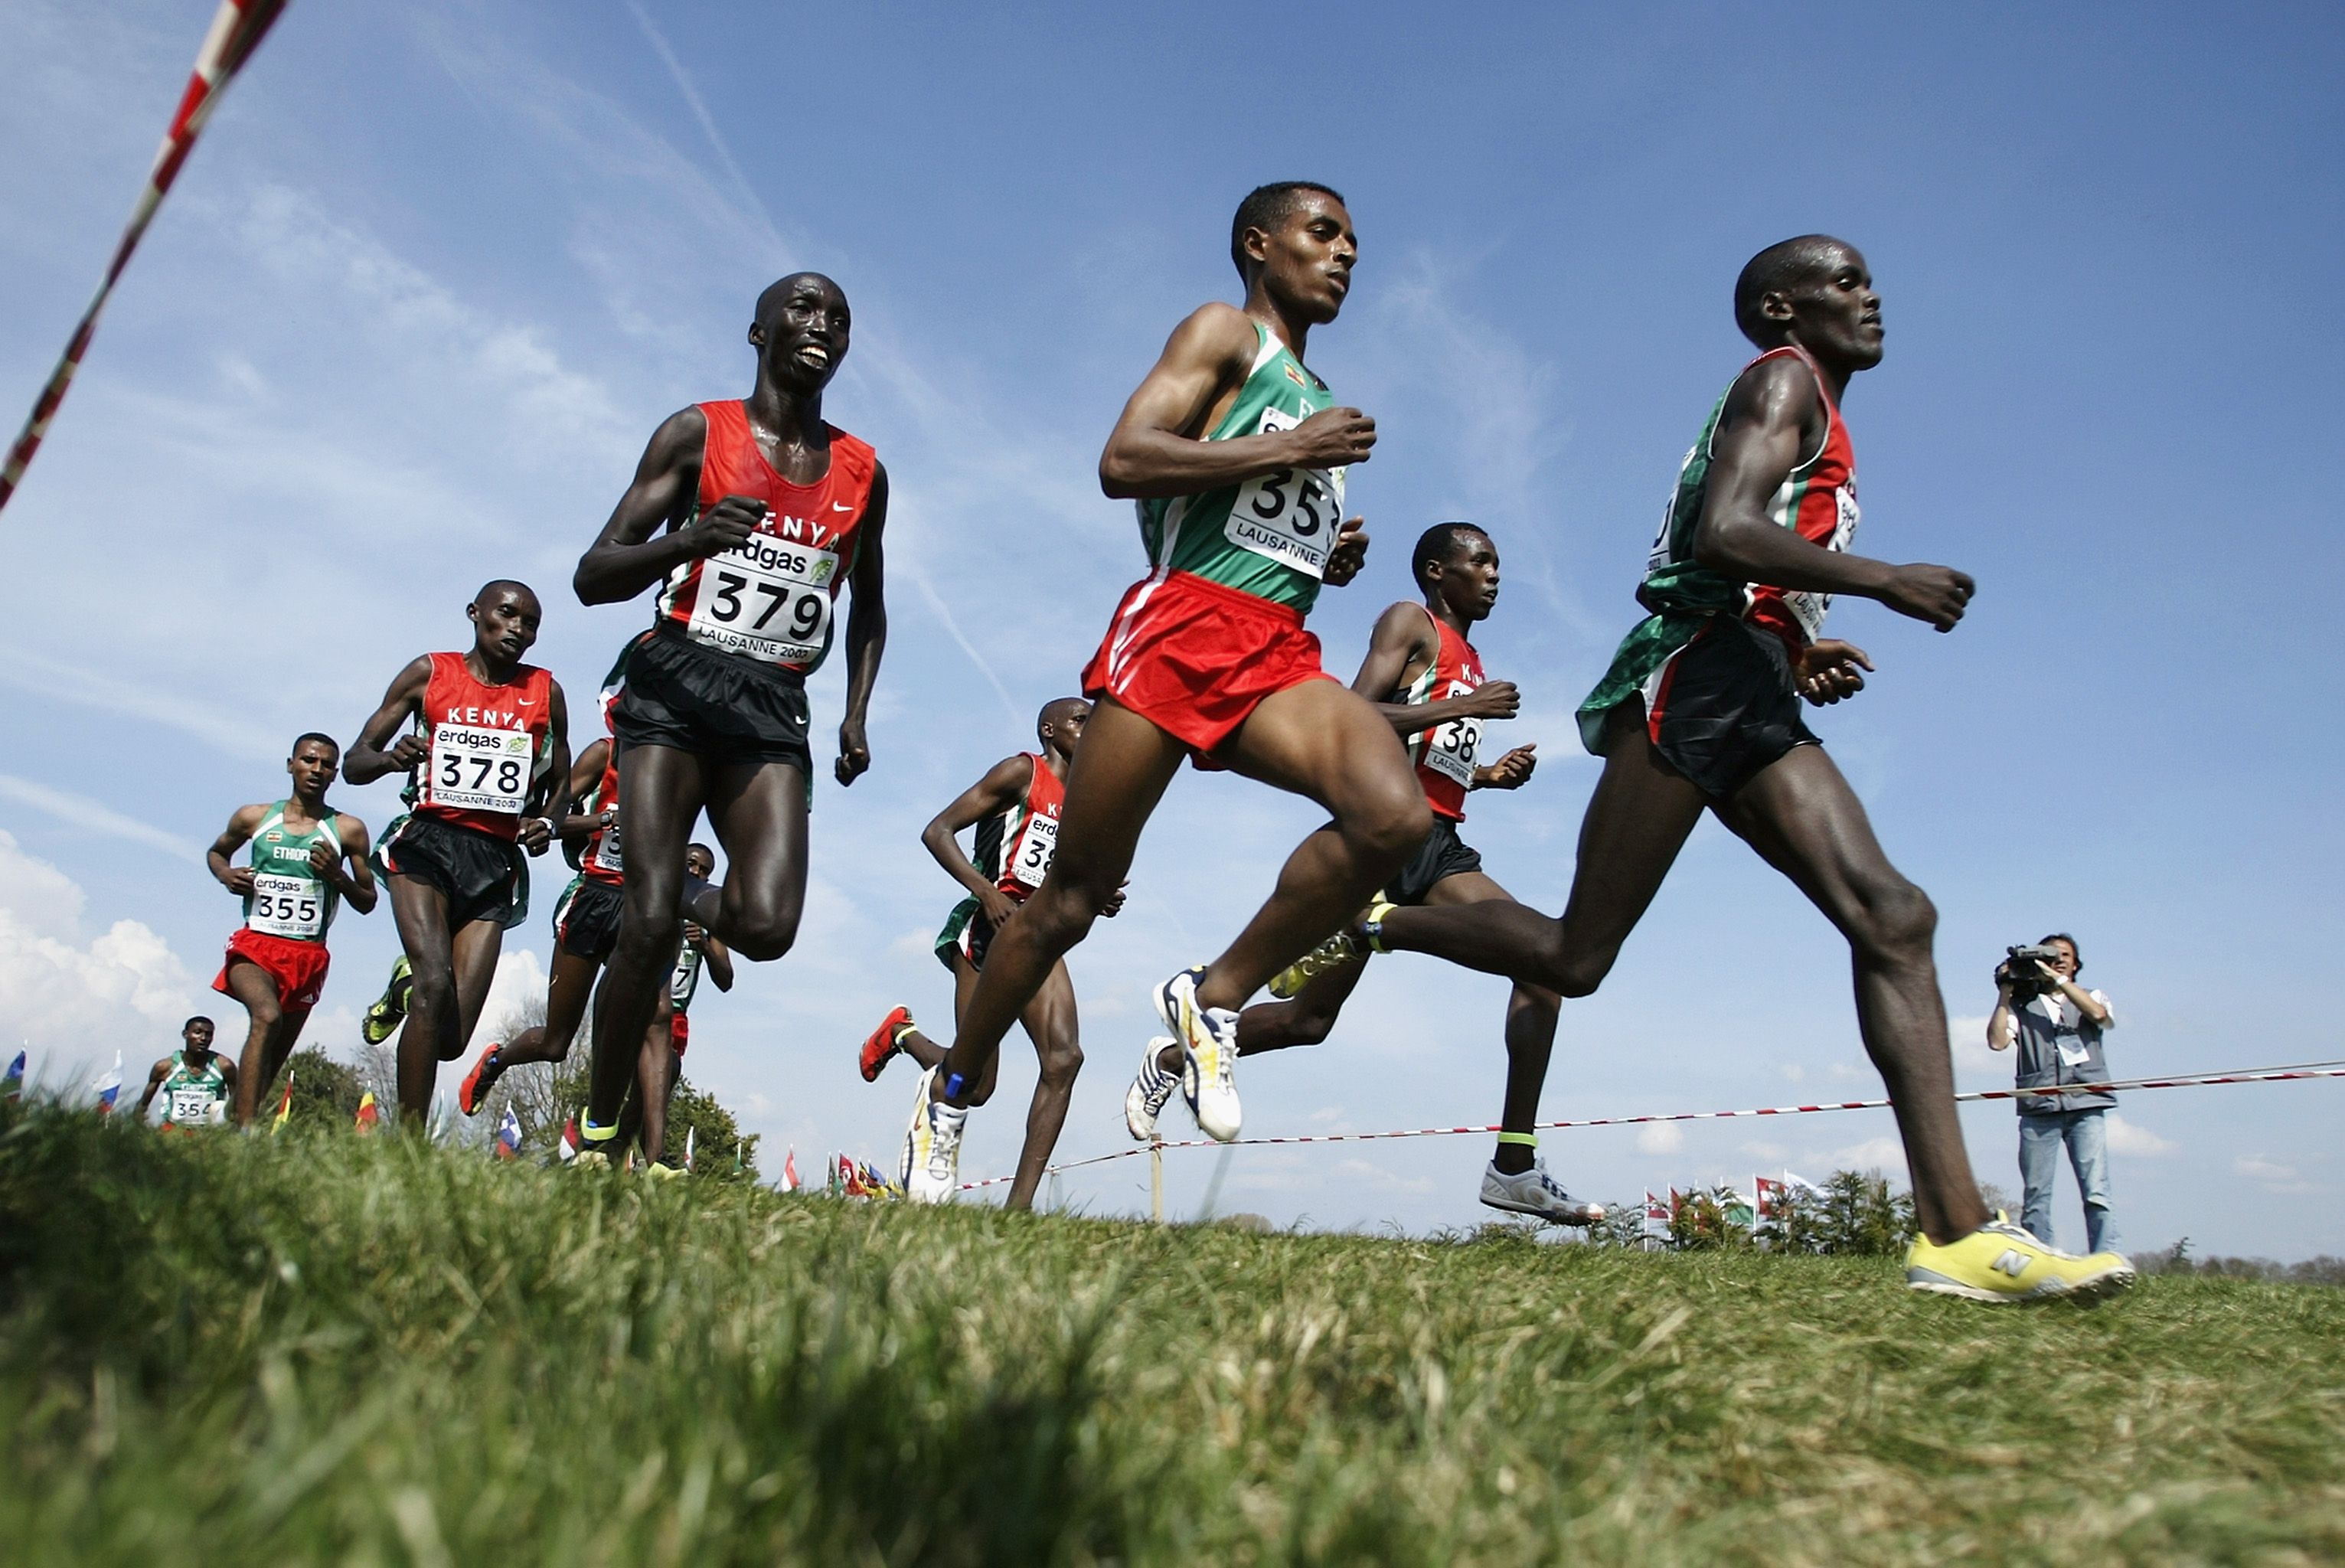 Kenenisa Bekele in action at the 2003 World Cross Country Championships